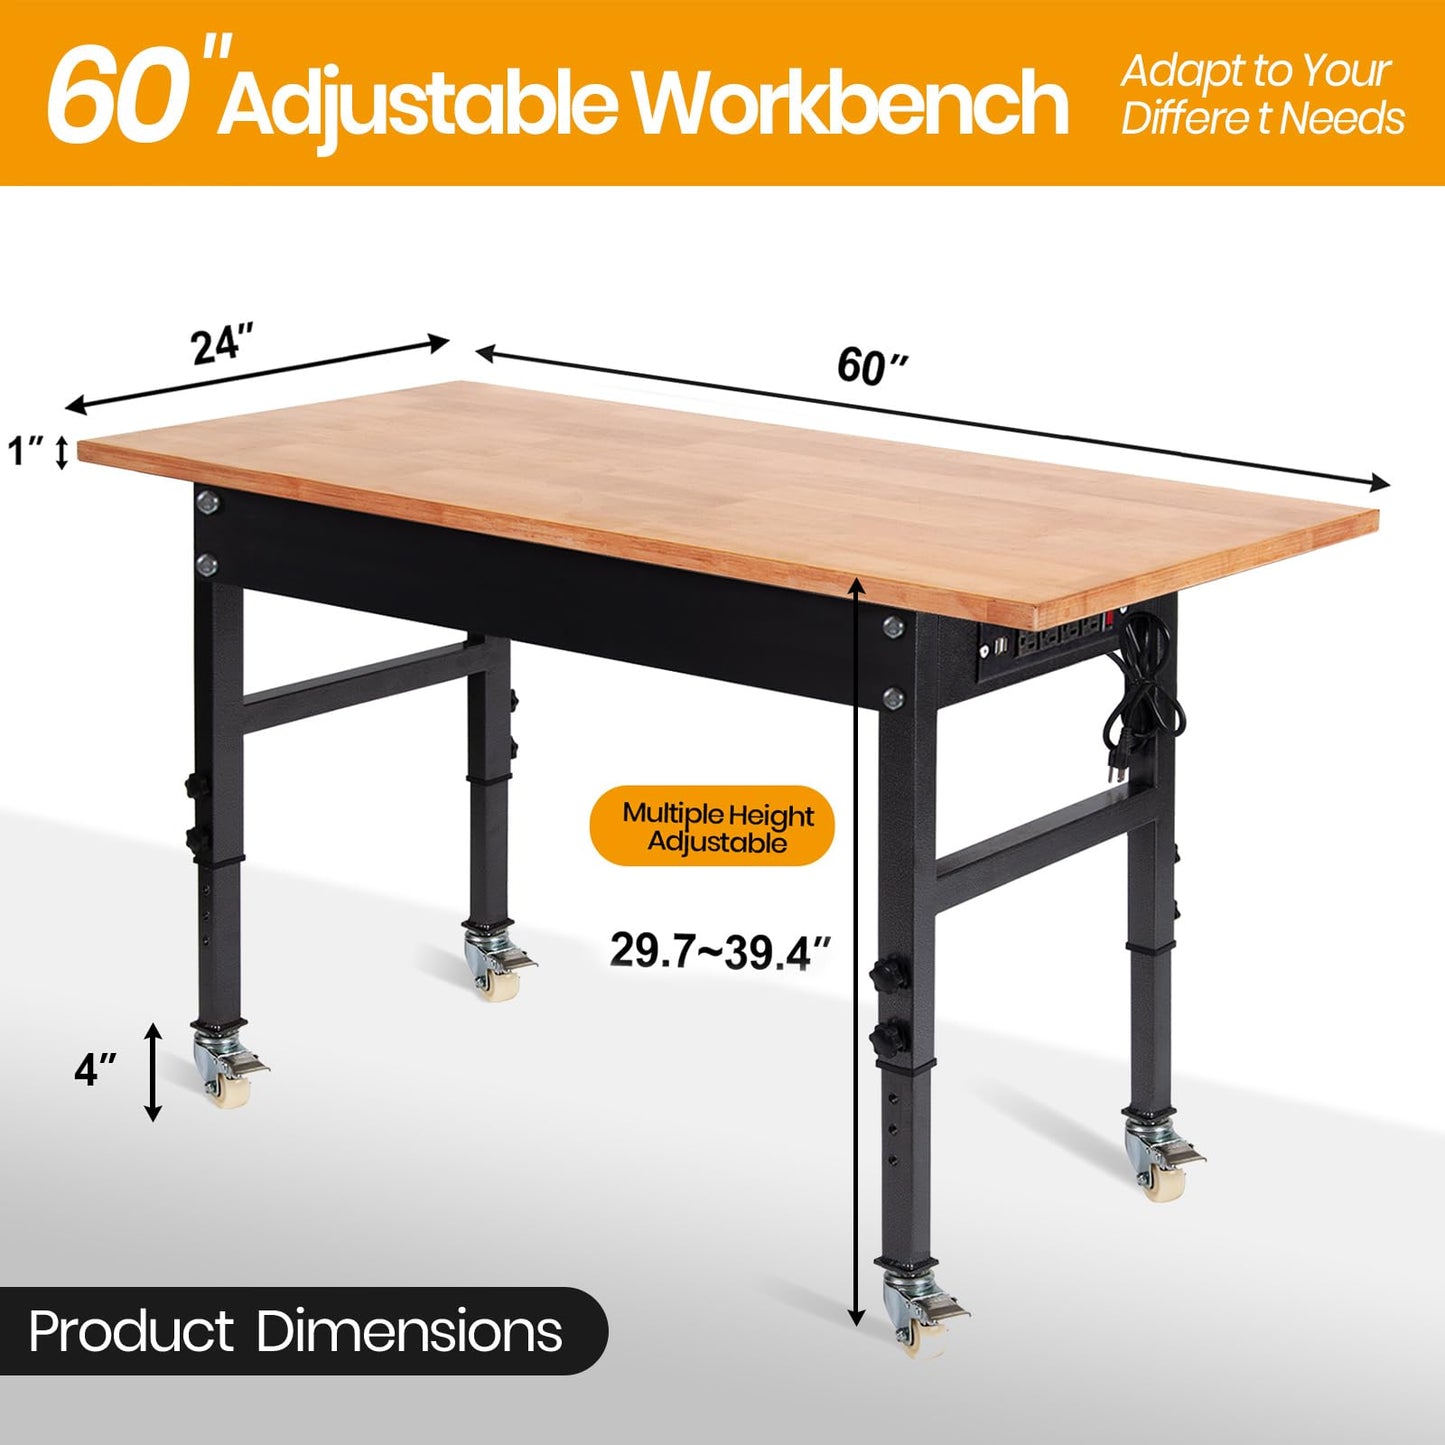 60" Adjustable Work Bench, Rubber Wood Top Heavy-Duty Workbench with Power Outlet with Wheels, 2000 LBS Load Capacity Hardwood Worktable, for Garage,